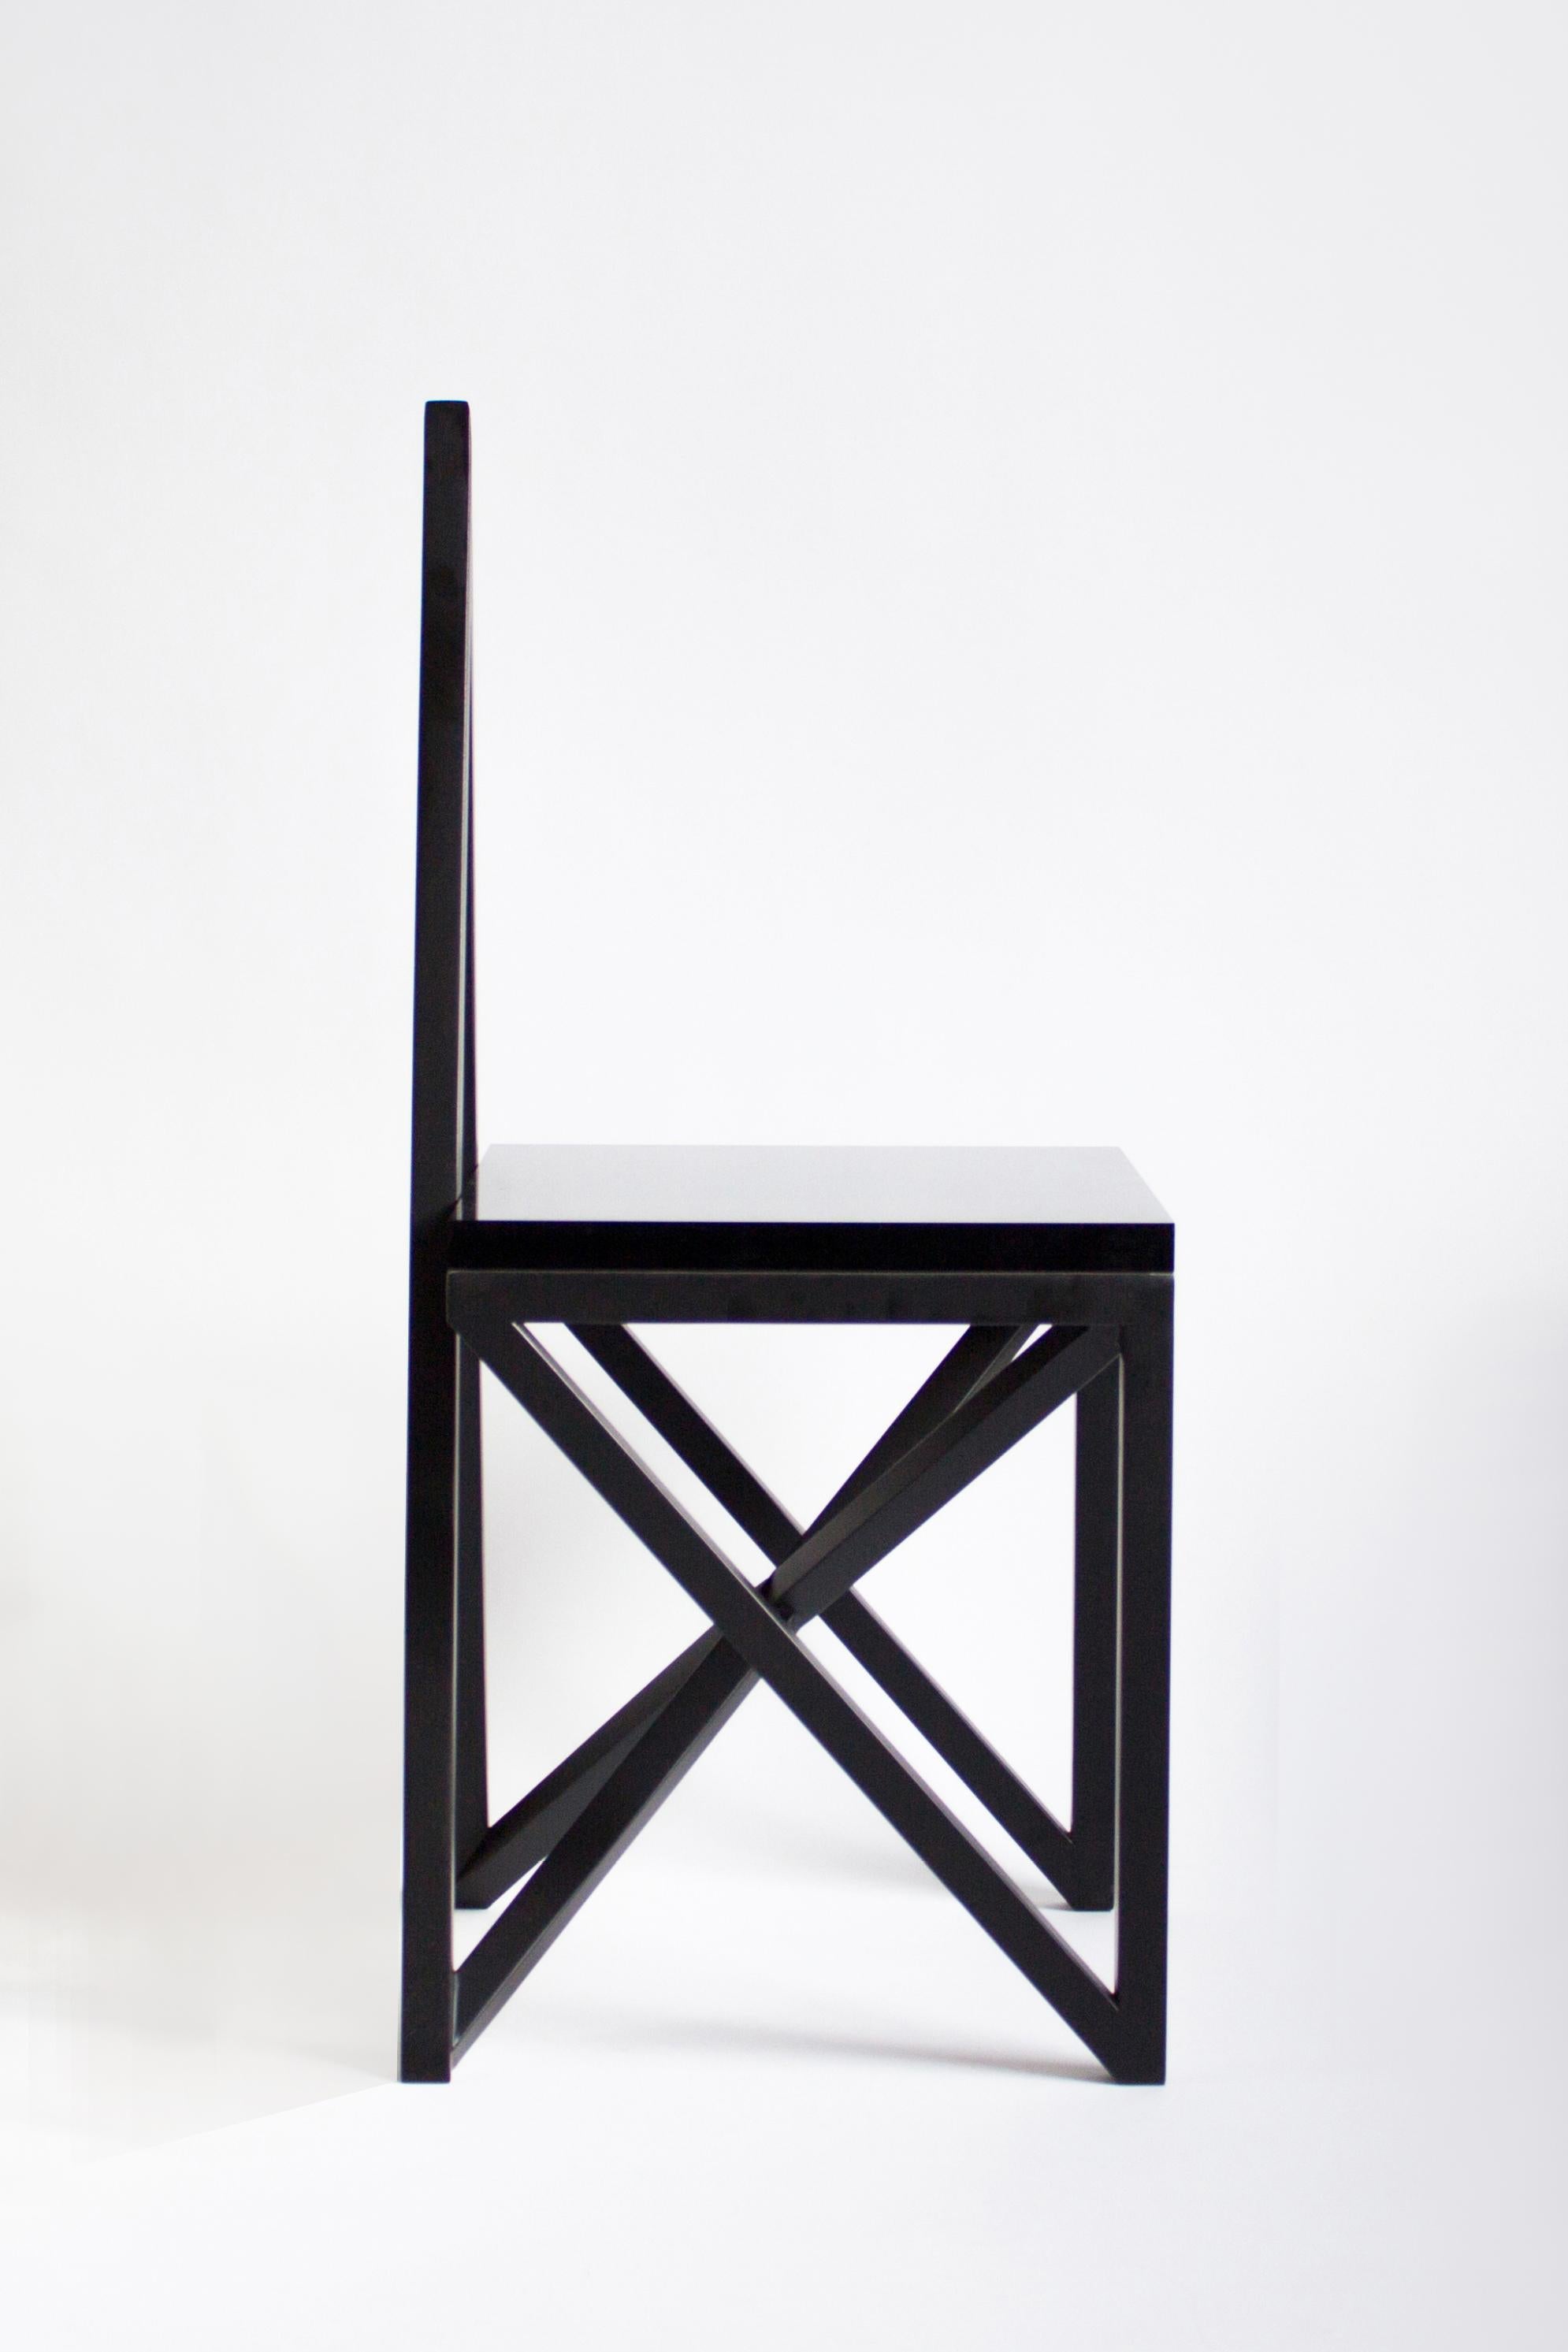 Material Lust [American, b. 1981,1986]
Pagan Chair, 2014
Shown in powder coated black steel with lucite seat. 
Measures: 33